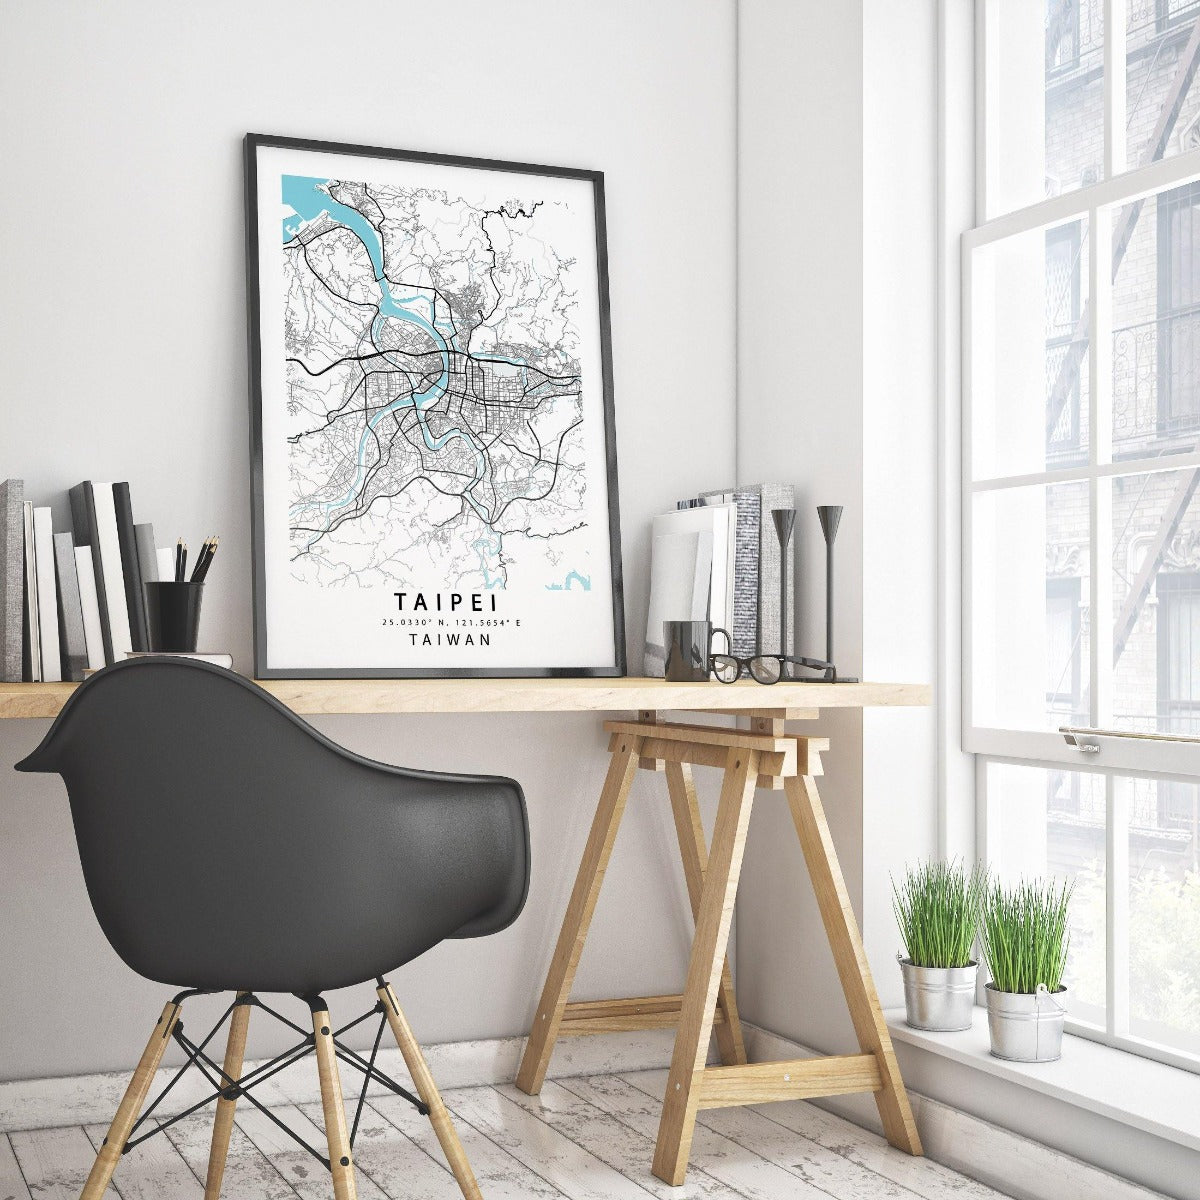 This Taipei City Map Print is the perfect addition to your home or office. With fine attention to detail, this map captures all the major landmarks and attractions of Taipei. Printed on high-quality paper, this map is perfect for framing or just hanging on your wall as a decoration.